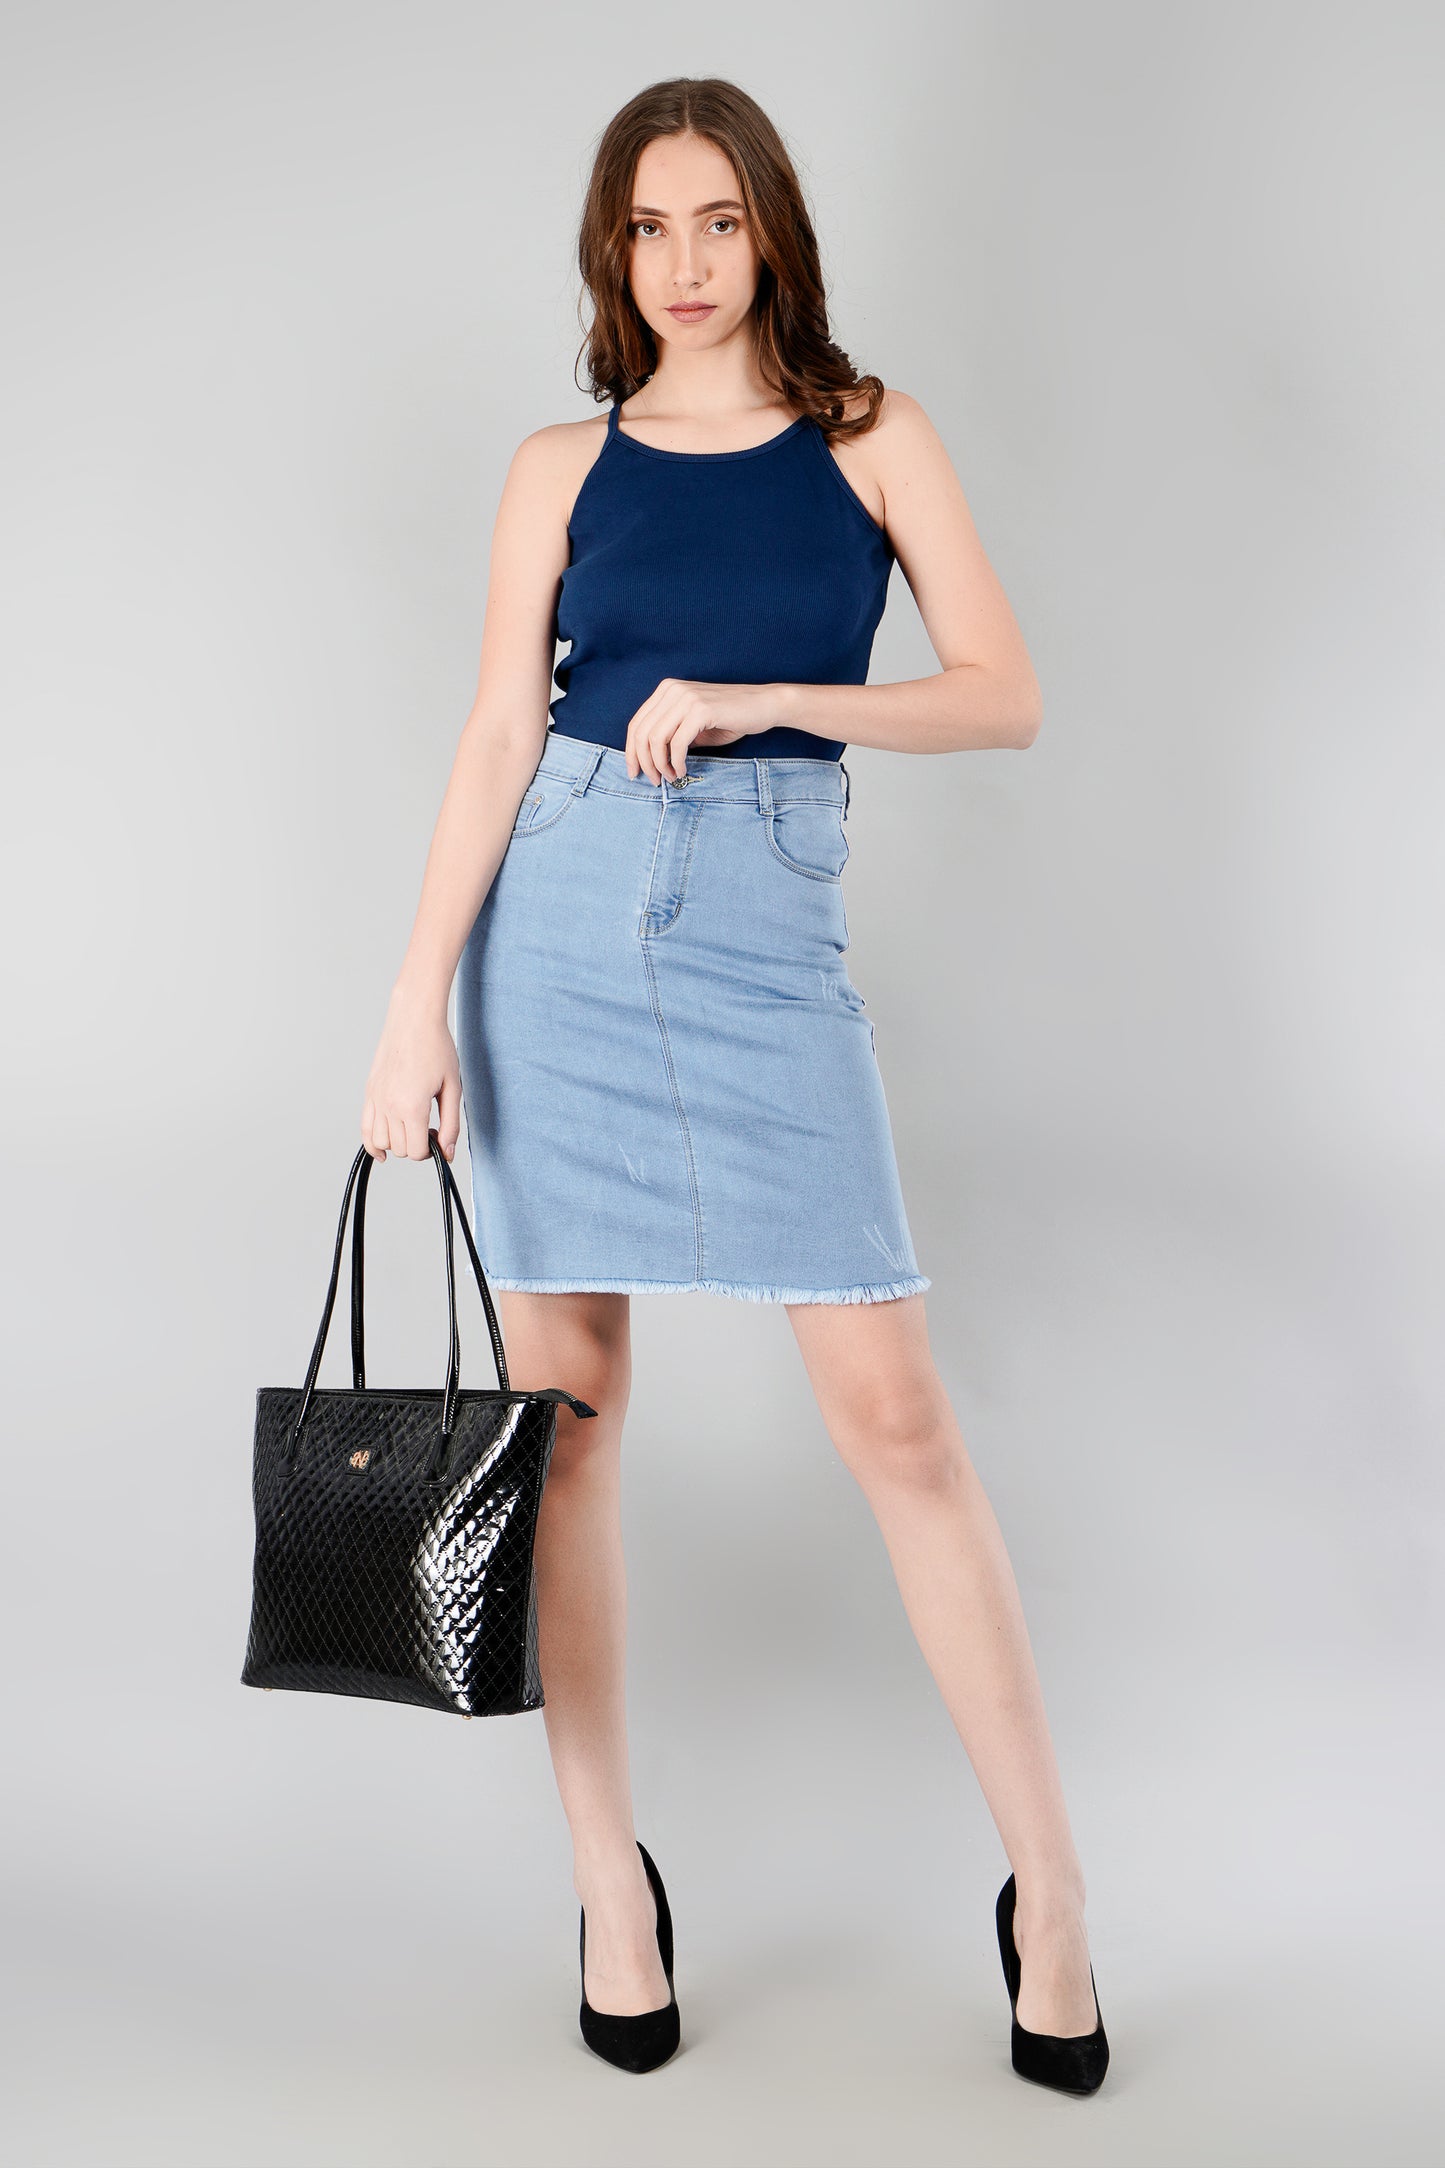 Women's Denim Skirts in Light Blue by Be Simple